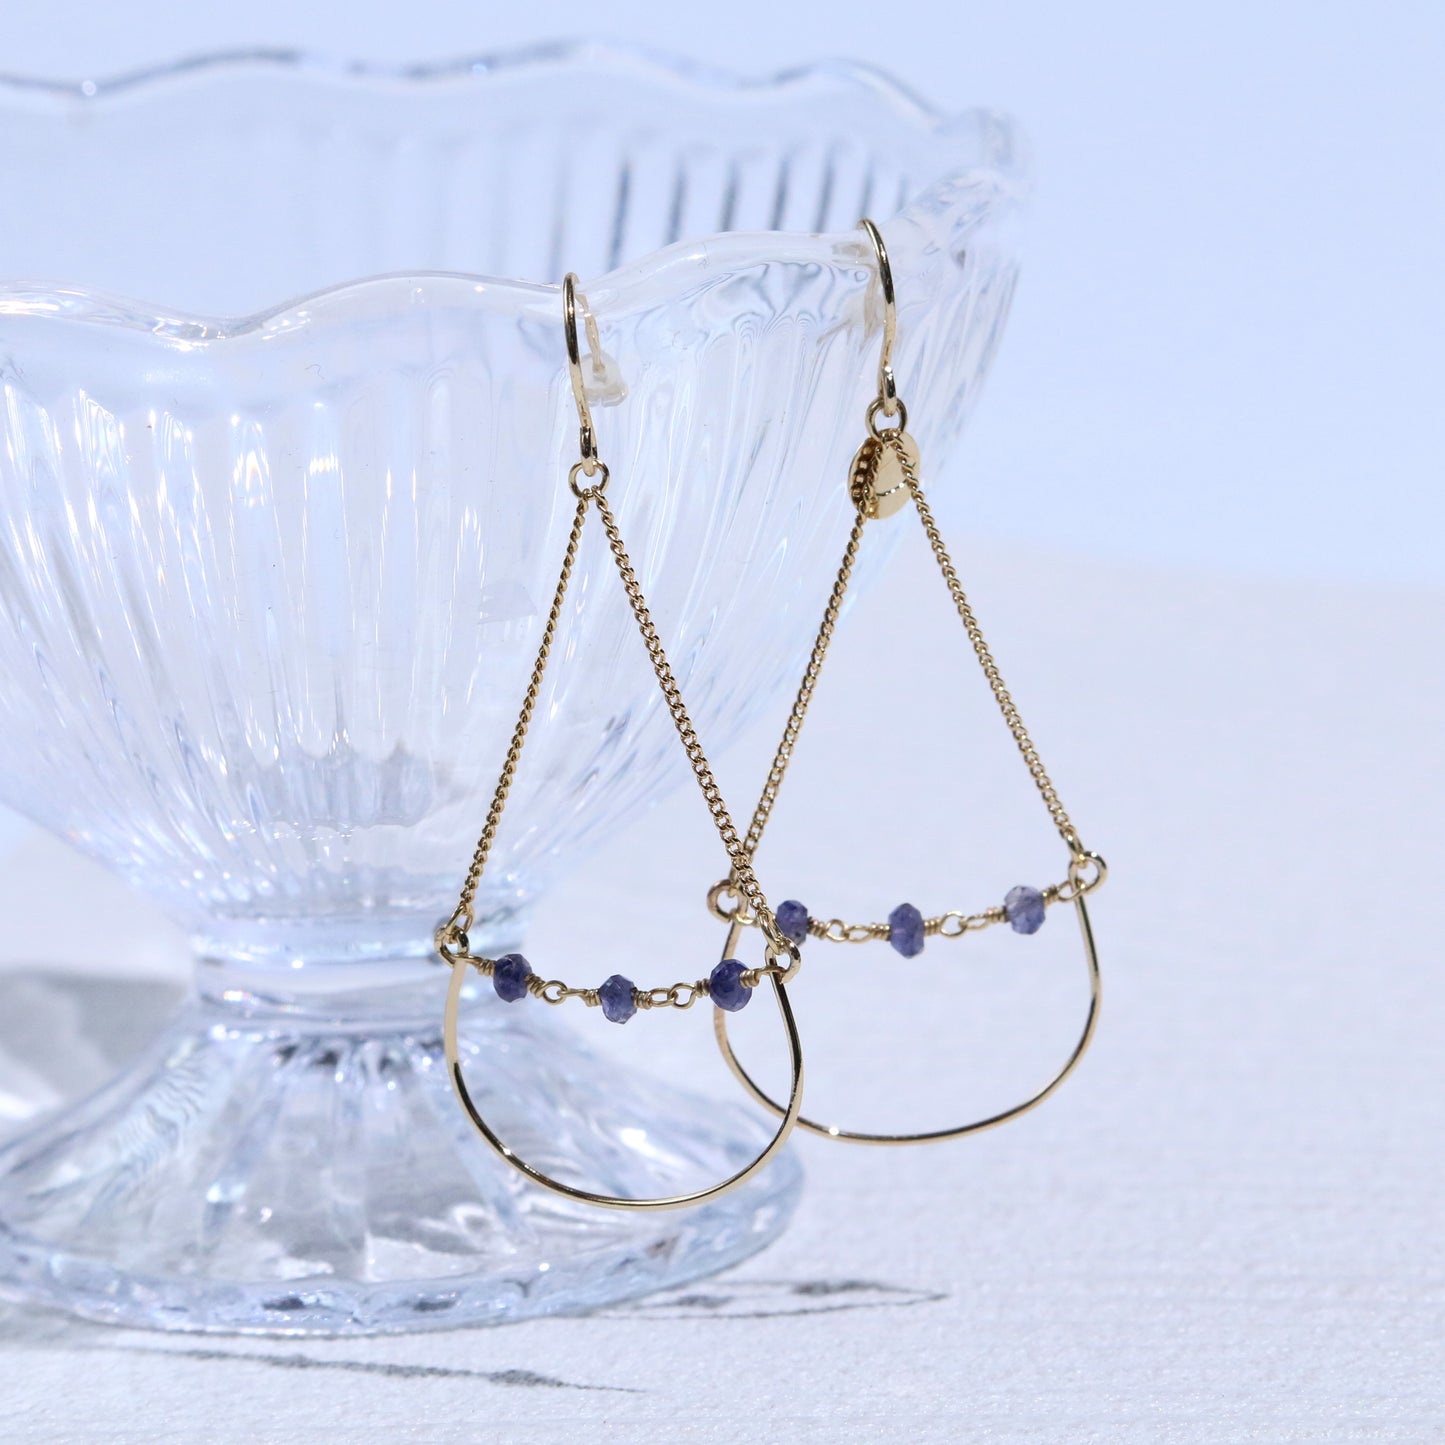 Hook earrings for Iolite and metal parts